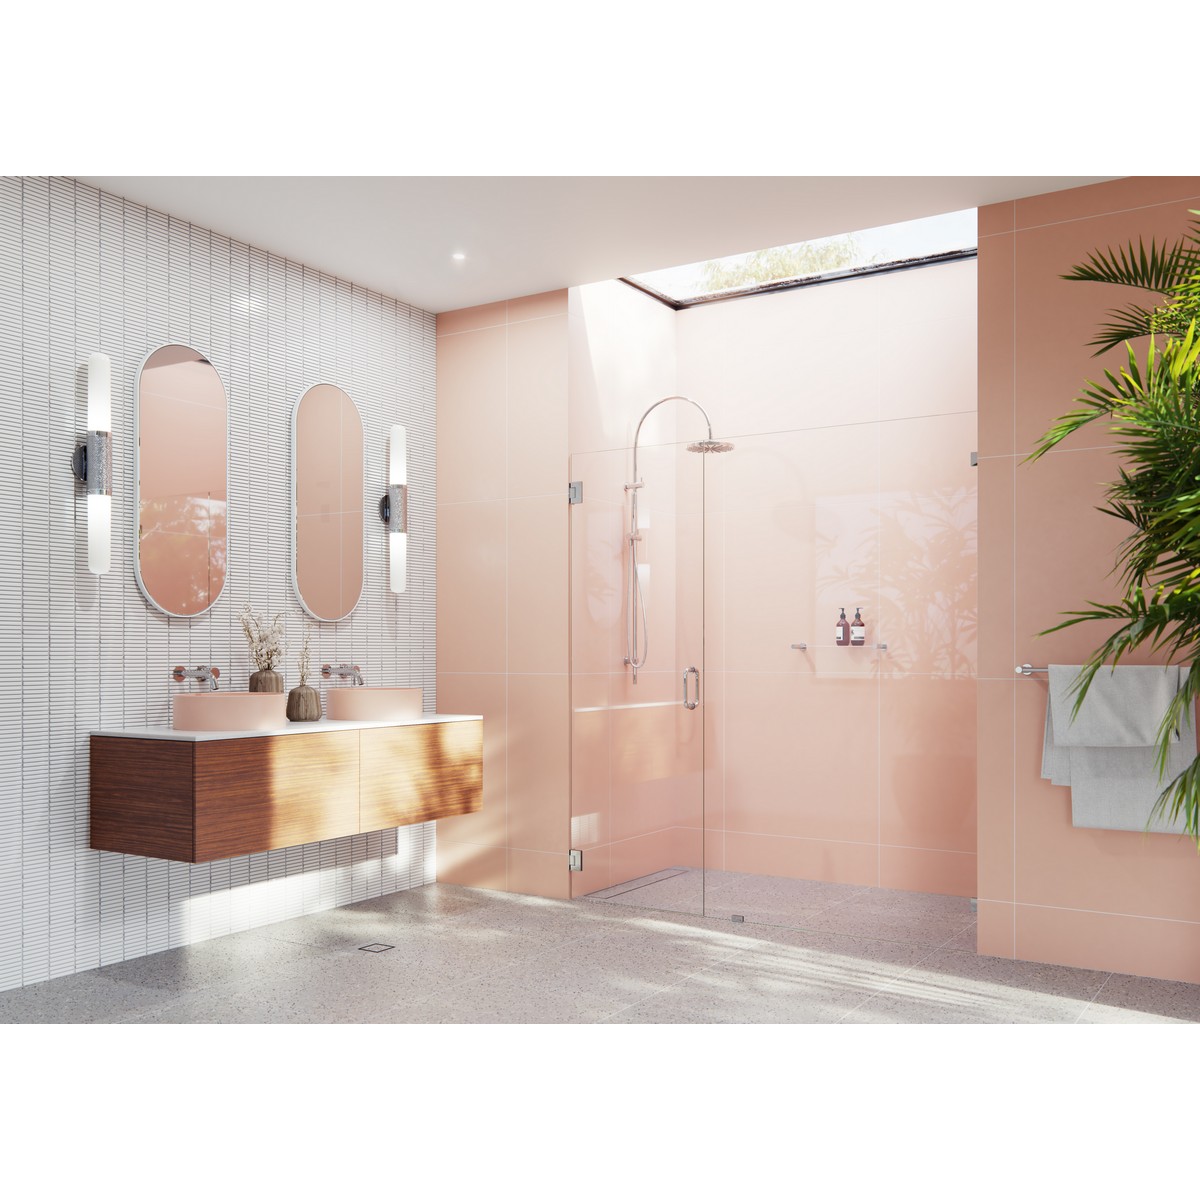 GLASS WAREHOUSE GW-WH-72.25 ILLUME 72 1/4 W X 78 H WALL HINGED FULLY FRAMELESS GLASS SHOWER ENCLOSURE